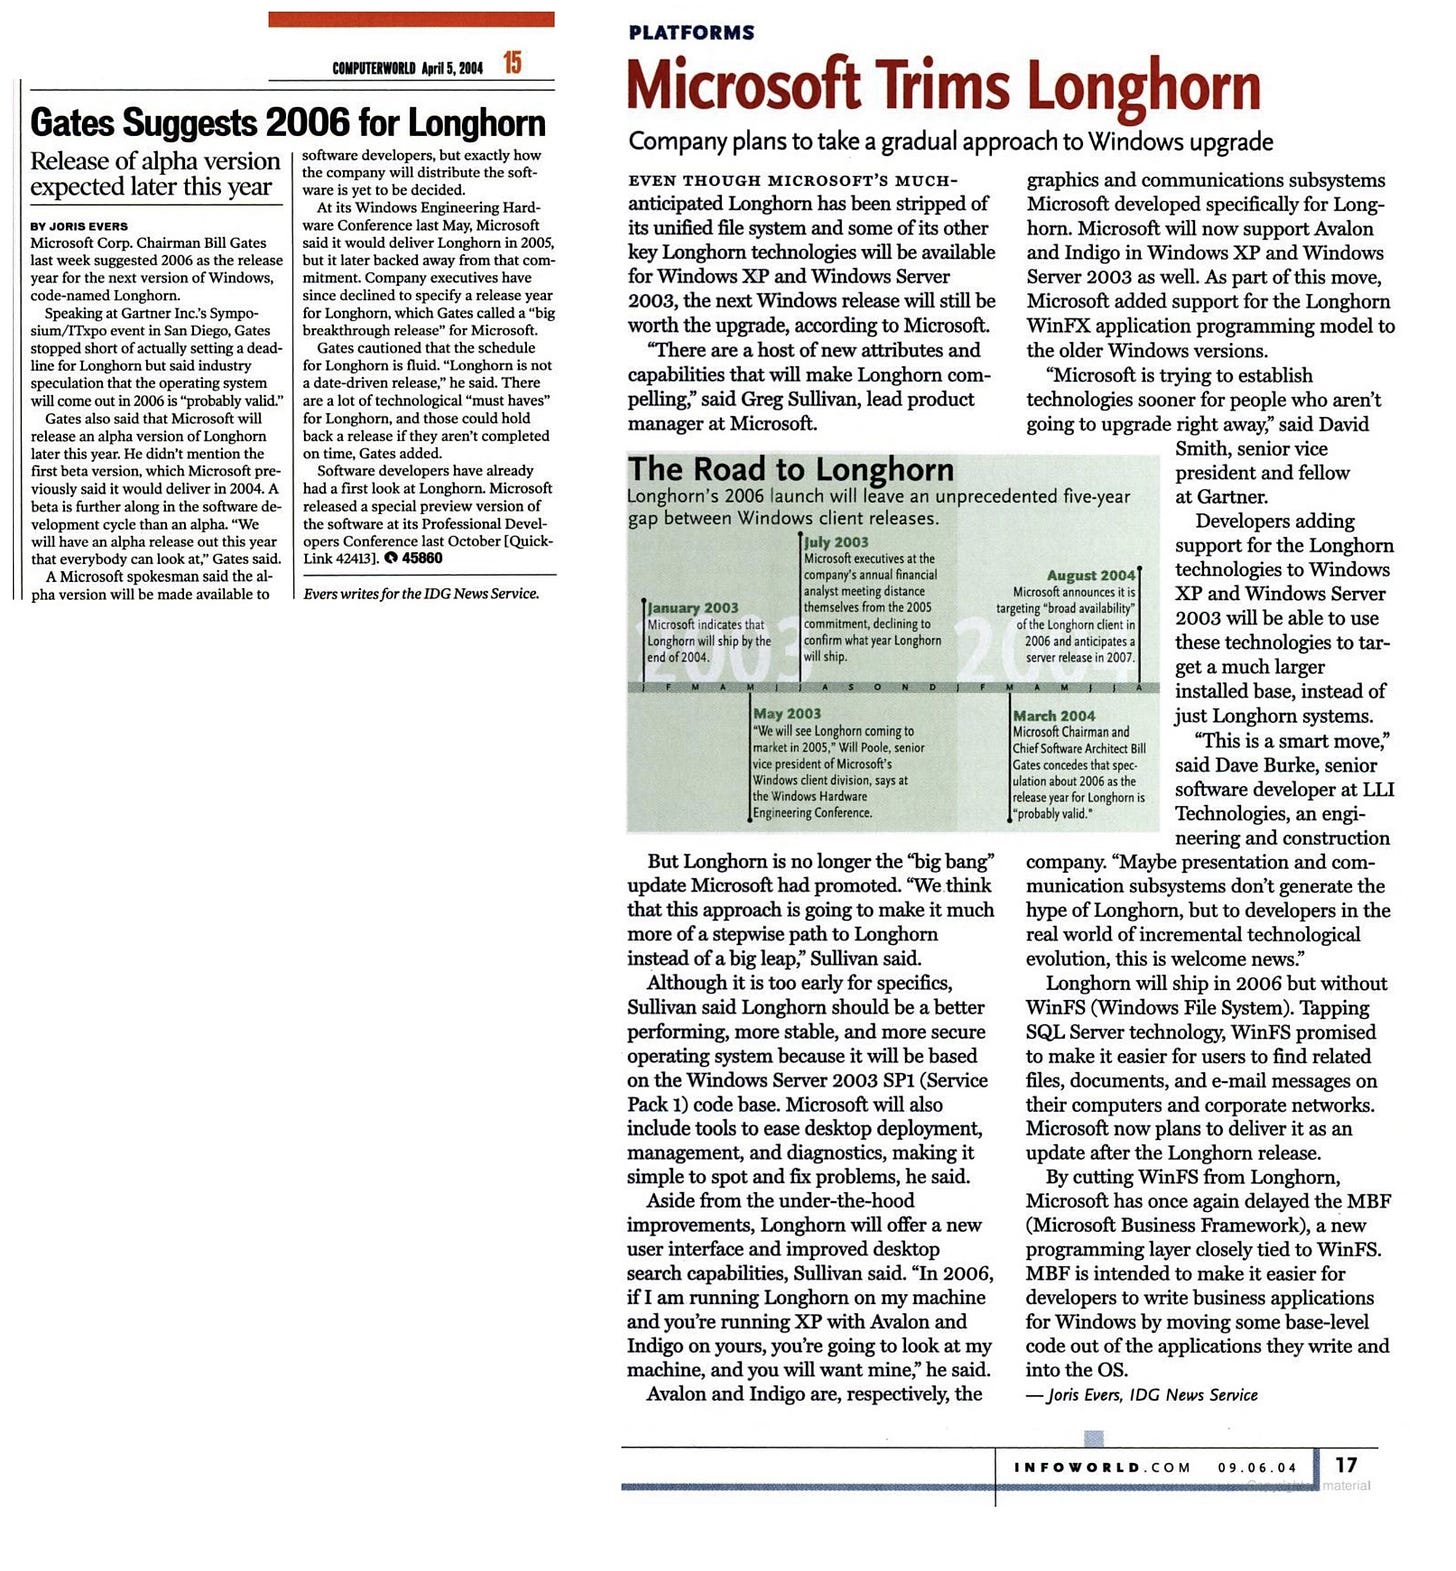 Gates Suggests 2006 for Longhorn Release of alpha version I software developers, but exactly how the company will distribute the soft- expected later this year ware is yet to be decided. At its Windows Engineering Hard- BY JORIS EVERS Microsoft Corp. Chairman Bill Gates last week suggested 2006 as the release year for the next version of Windows, code-named Longhorn. and a second story Microsoft Trims Longhorn Company plans to take a gradual approach to Windows upgrade EVEN THOUGH MICROSOFT'S MUCH- graphics and communications subsystems anticipated Longhorn has been stripped of Microsoft developed specifically for Long- its unified file system and some of its other horn. Microsoft will now support Avalon key Longhorn technologies will be available and Indigo in Windows XP and Windows for Windows XP and Windows Server Server 2003 as well. As part of this move, 2003, the next Windows release will still be Microsoft added support for the Longhorn worth the upgrade, according to Microsoft. WinFX application programming model to "There are a host of new attributes and the older Windows versions. capabilities that will make Longhorn com- "Microsoft is trying to establish pelling," said Greg Sullivan, lead product technologies sooner for people who aren't manager at Microsoft. going to upgrade right away," said David Smith, senior vice The Road to Longhorn